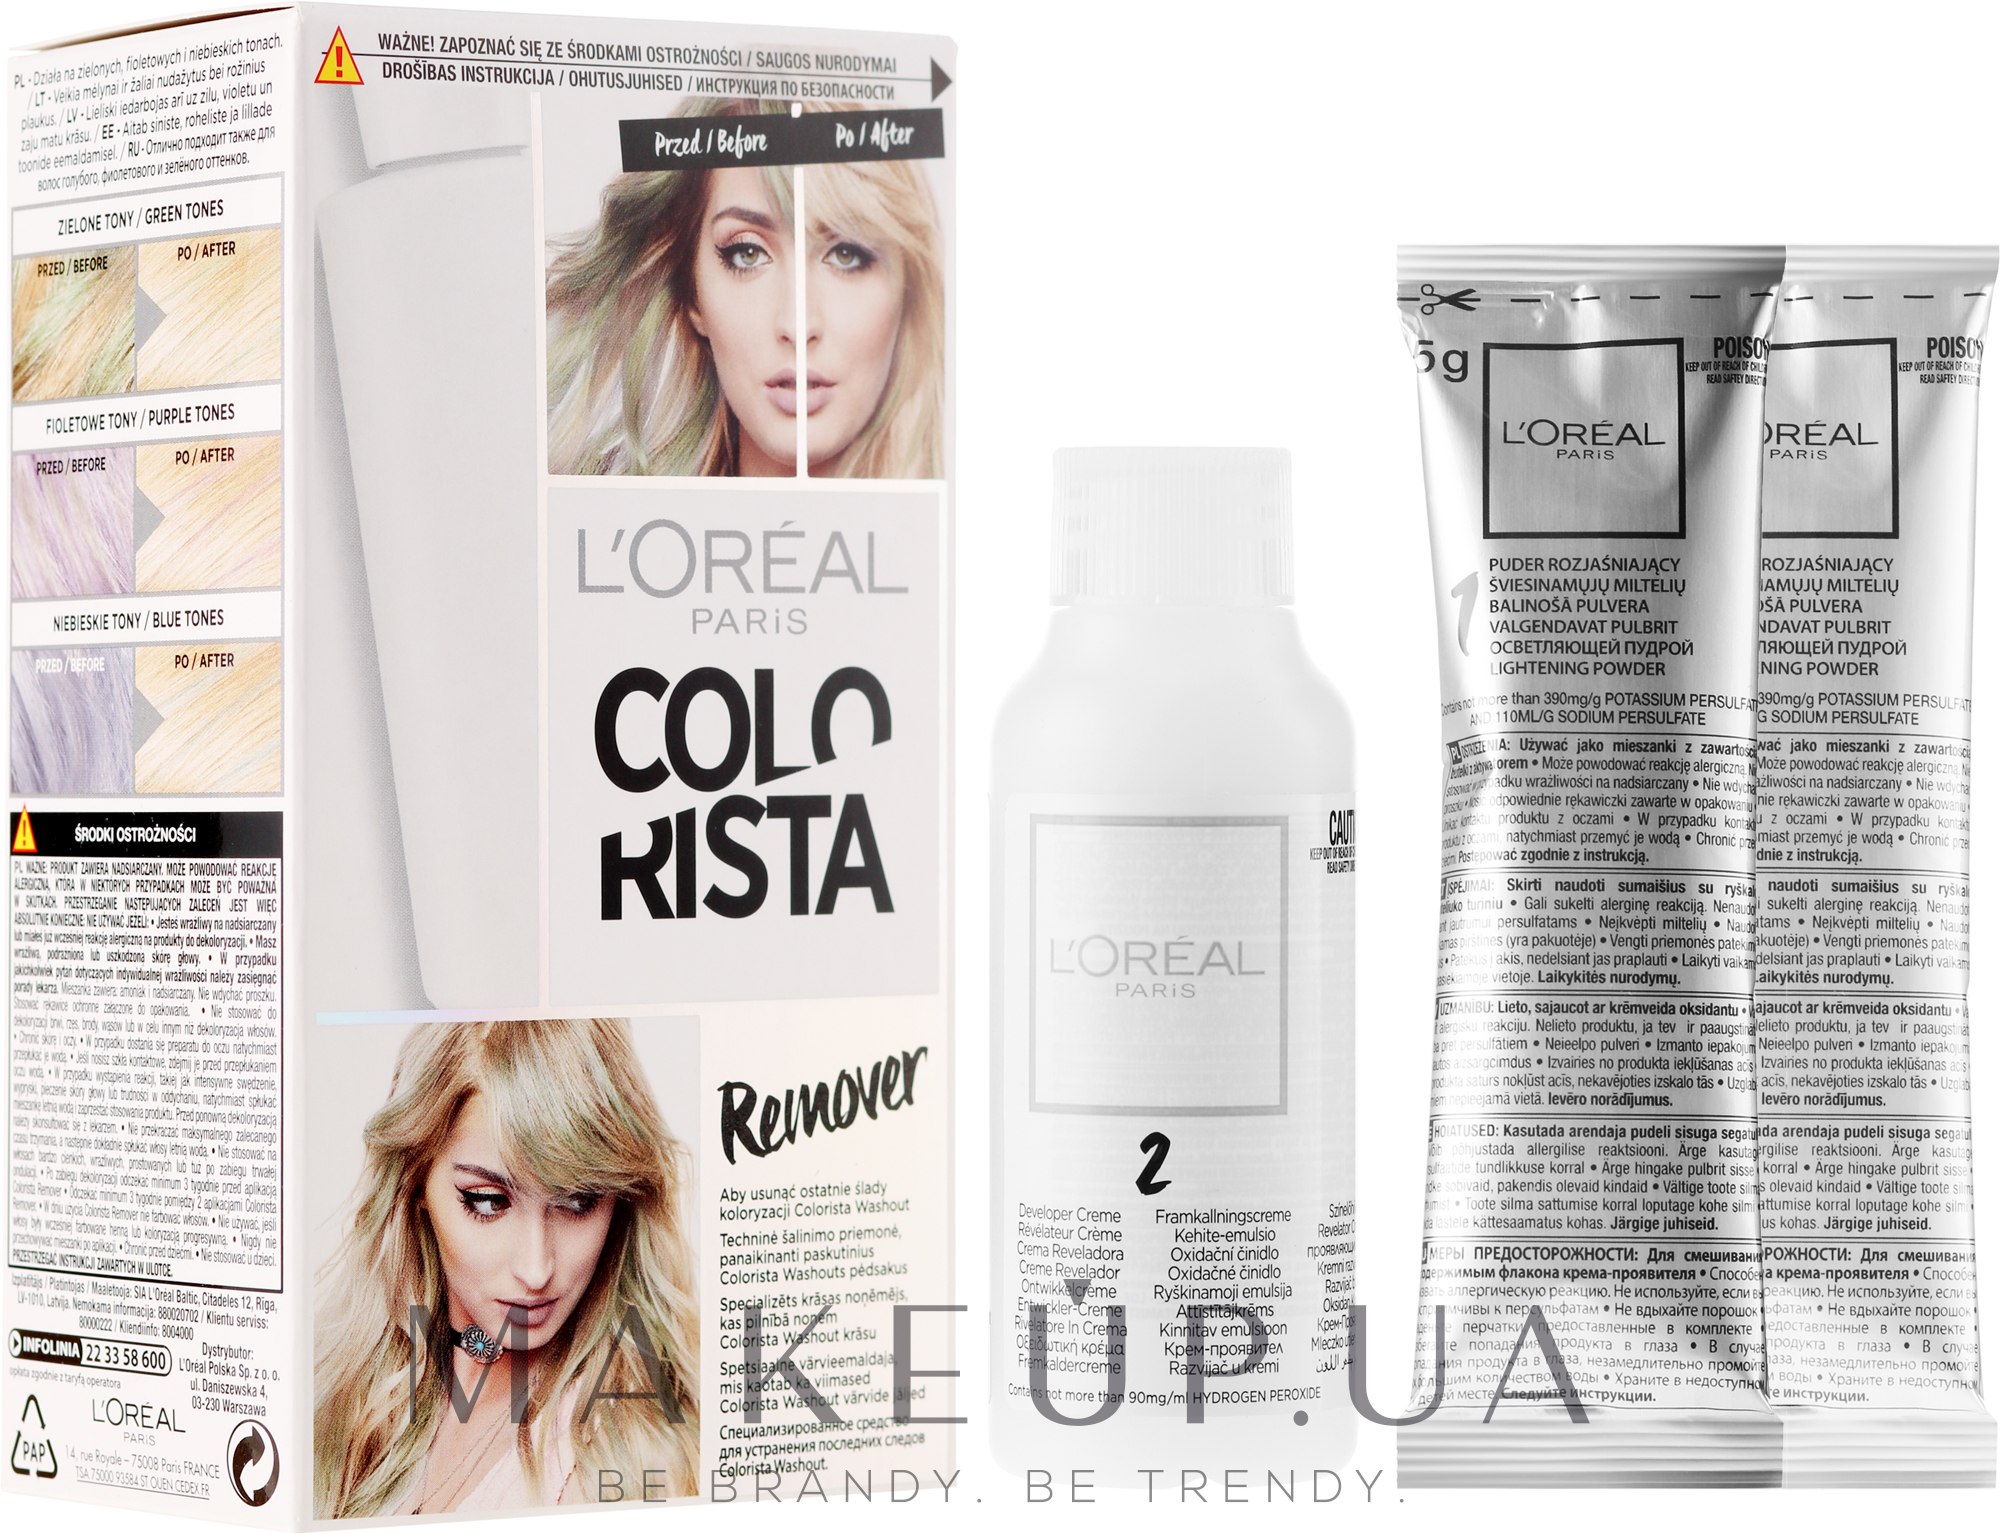 L'Oreal Paris Colorista Hair Makeup Temporary 1-Day Hair Color for Blondes and Brunettes, Rose Gold - wide 8